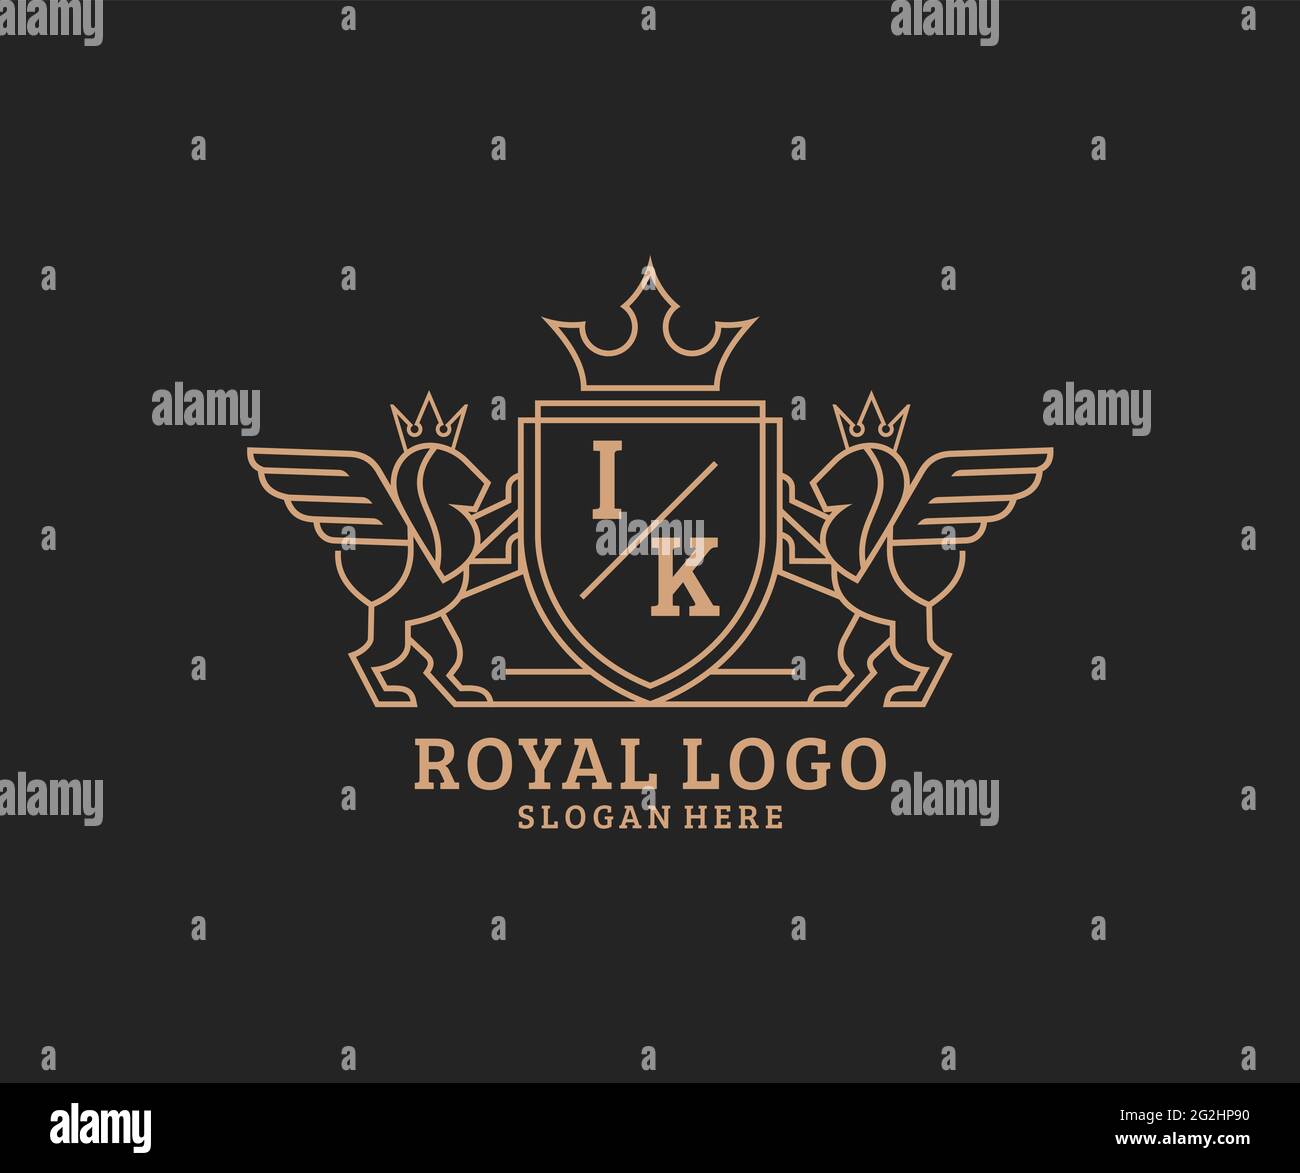 IK Letter Lion Royal Luxury Heraldic,Crest Logo template in vector art for Restaurant, Royalty, Boutique, Cafe, Hotel, Heraldic, Jewelry, Fashion and Stock Vector